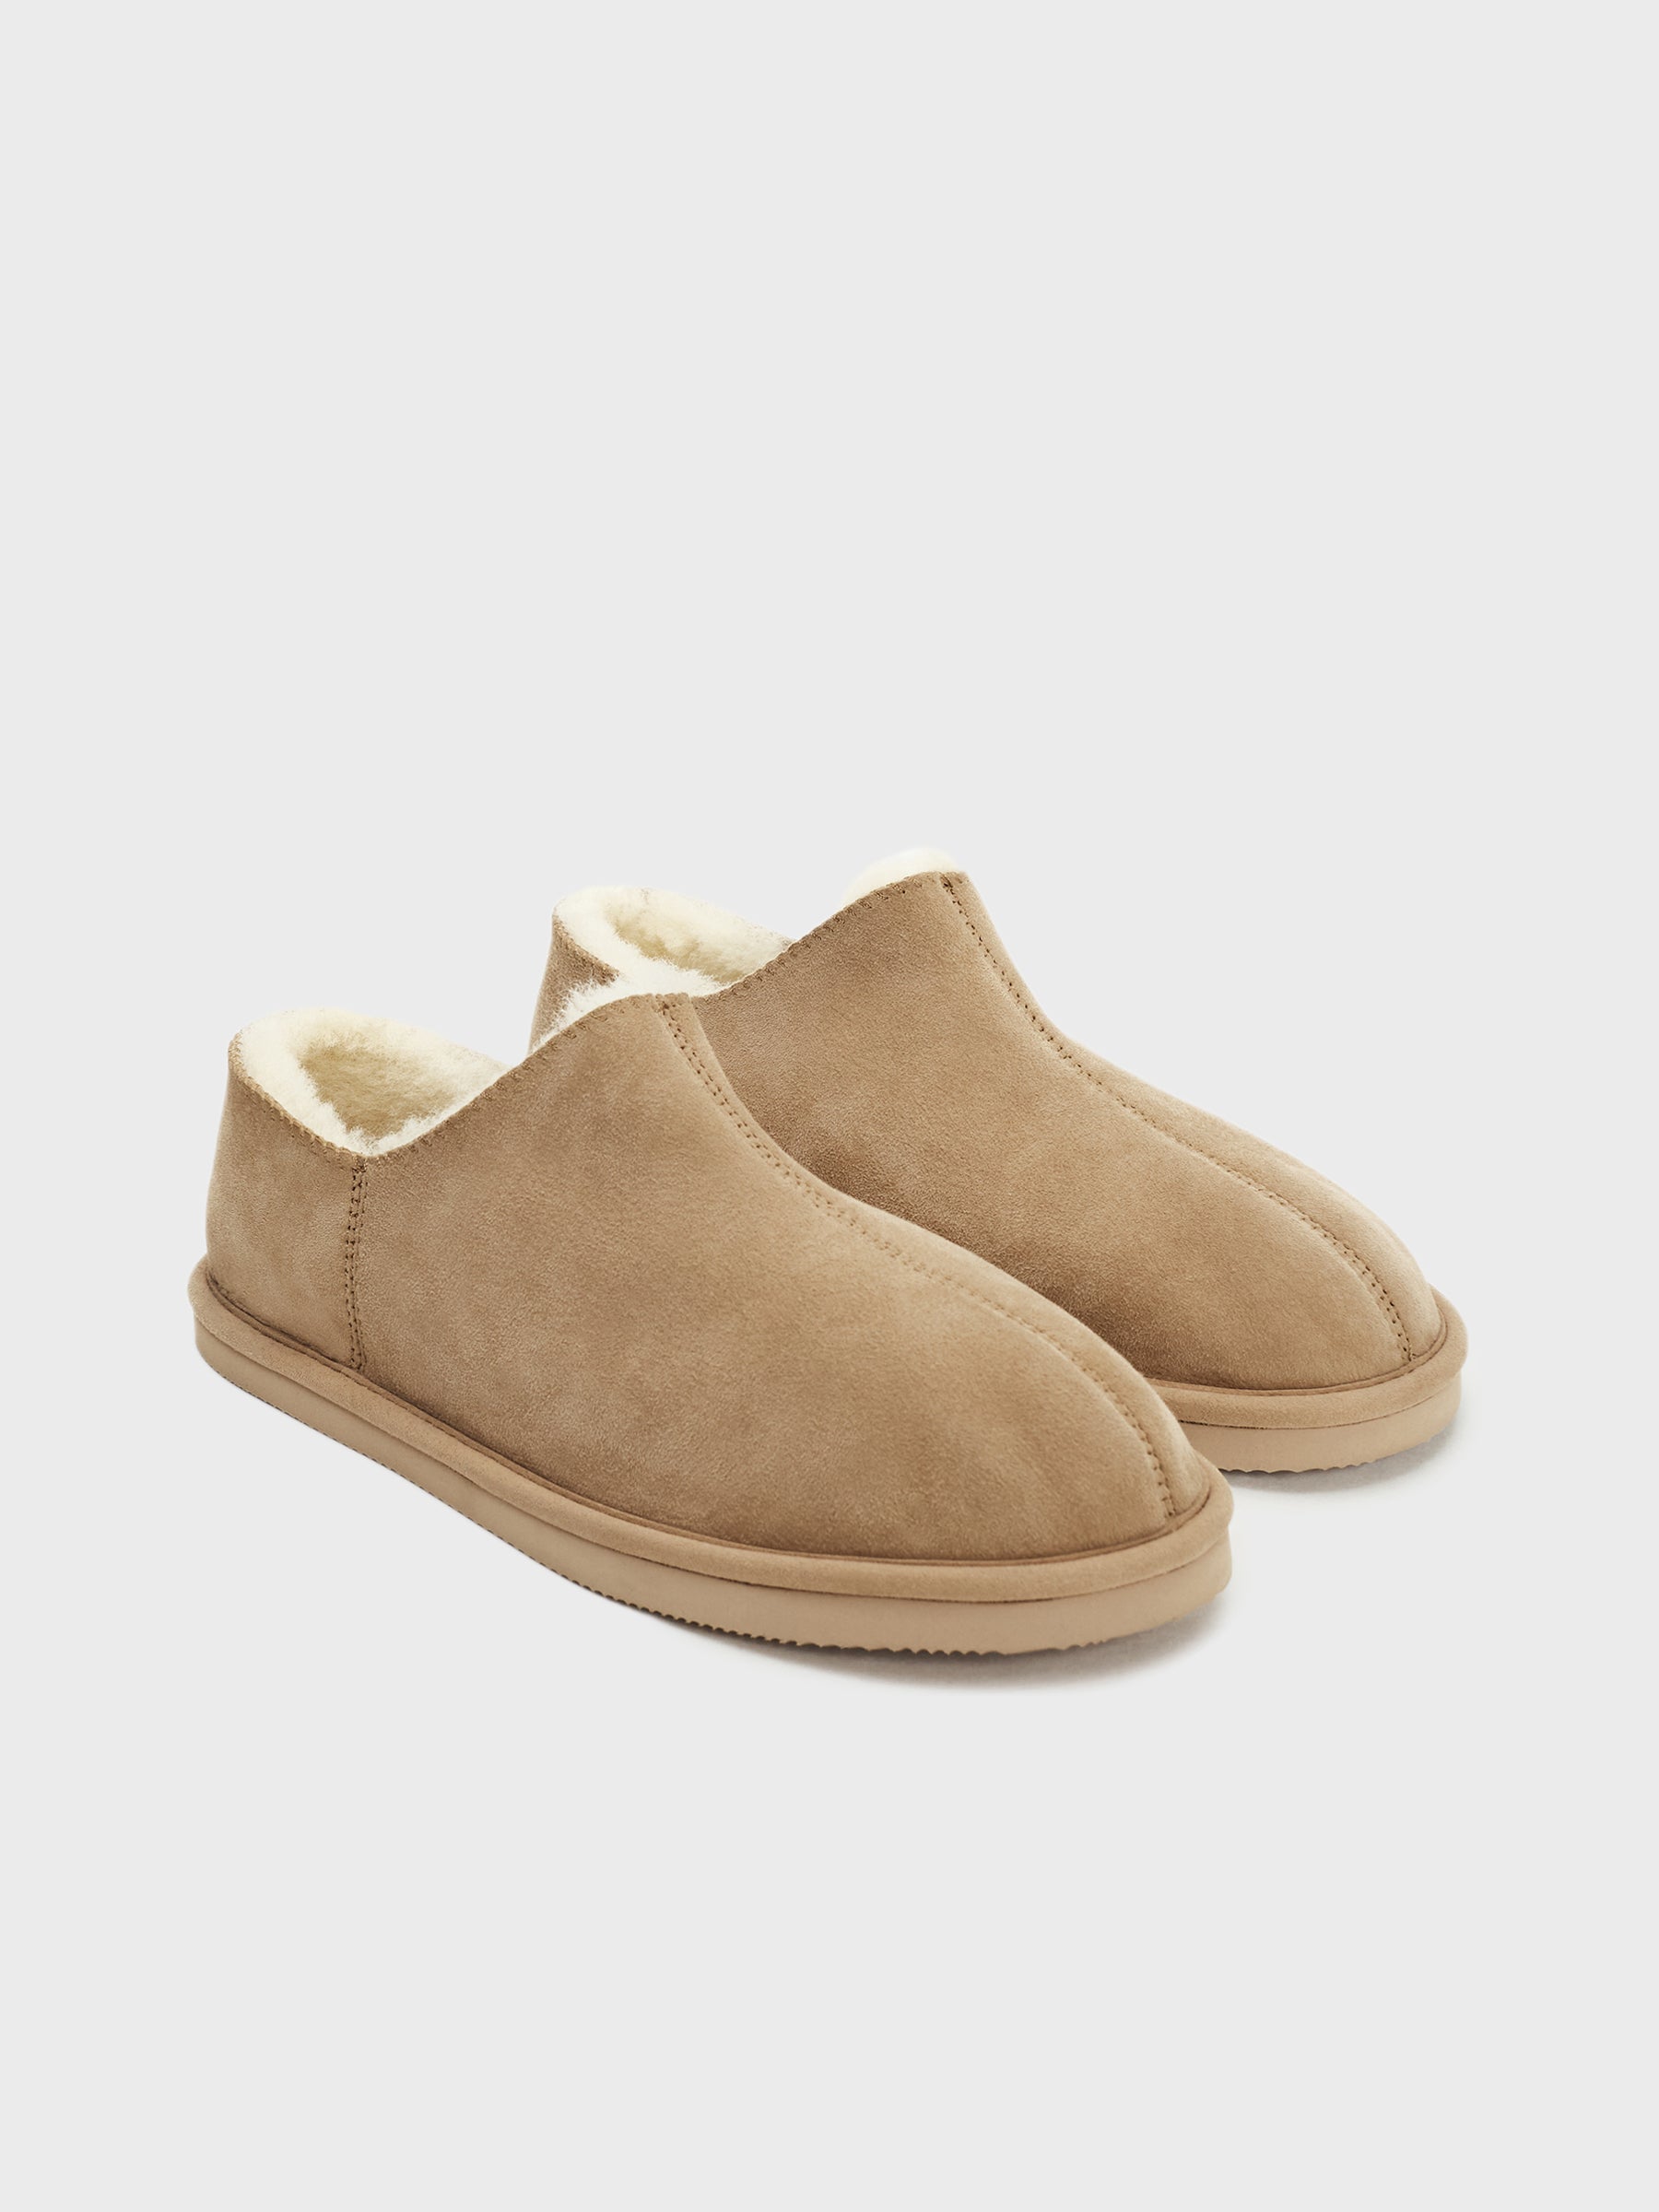 Low shearling-lined boots